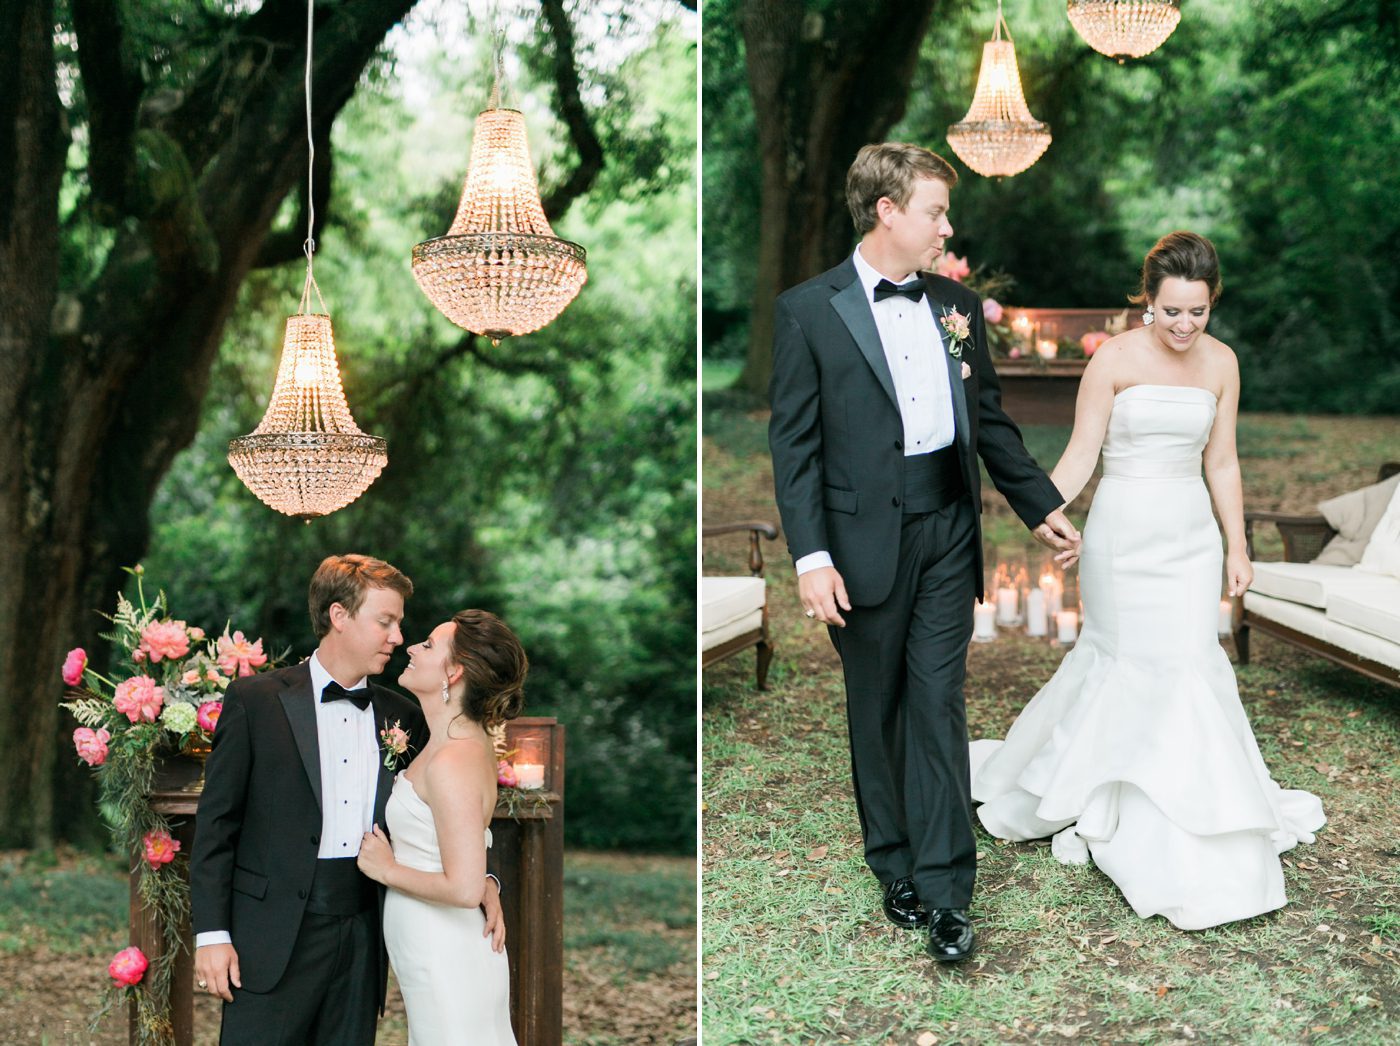 Romantic wedding photo of bride and groom under crystal chandelier and tree. Photo by Charleston wedding photographer Catherine Ann Photography